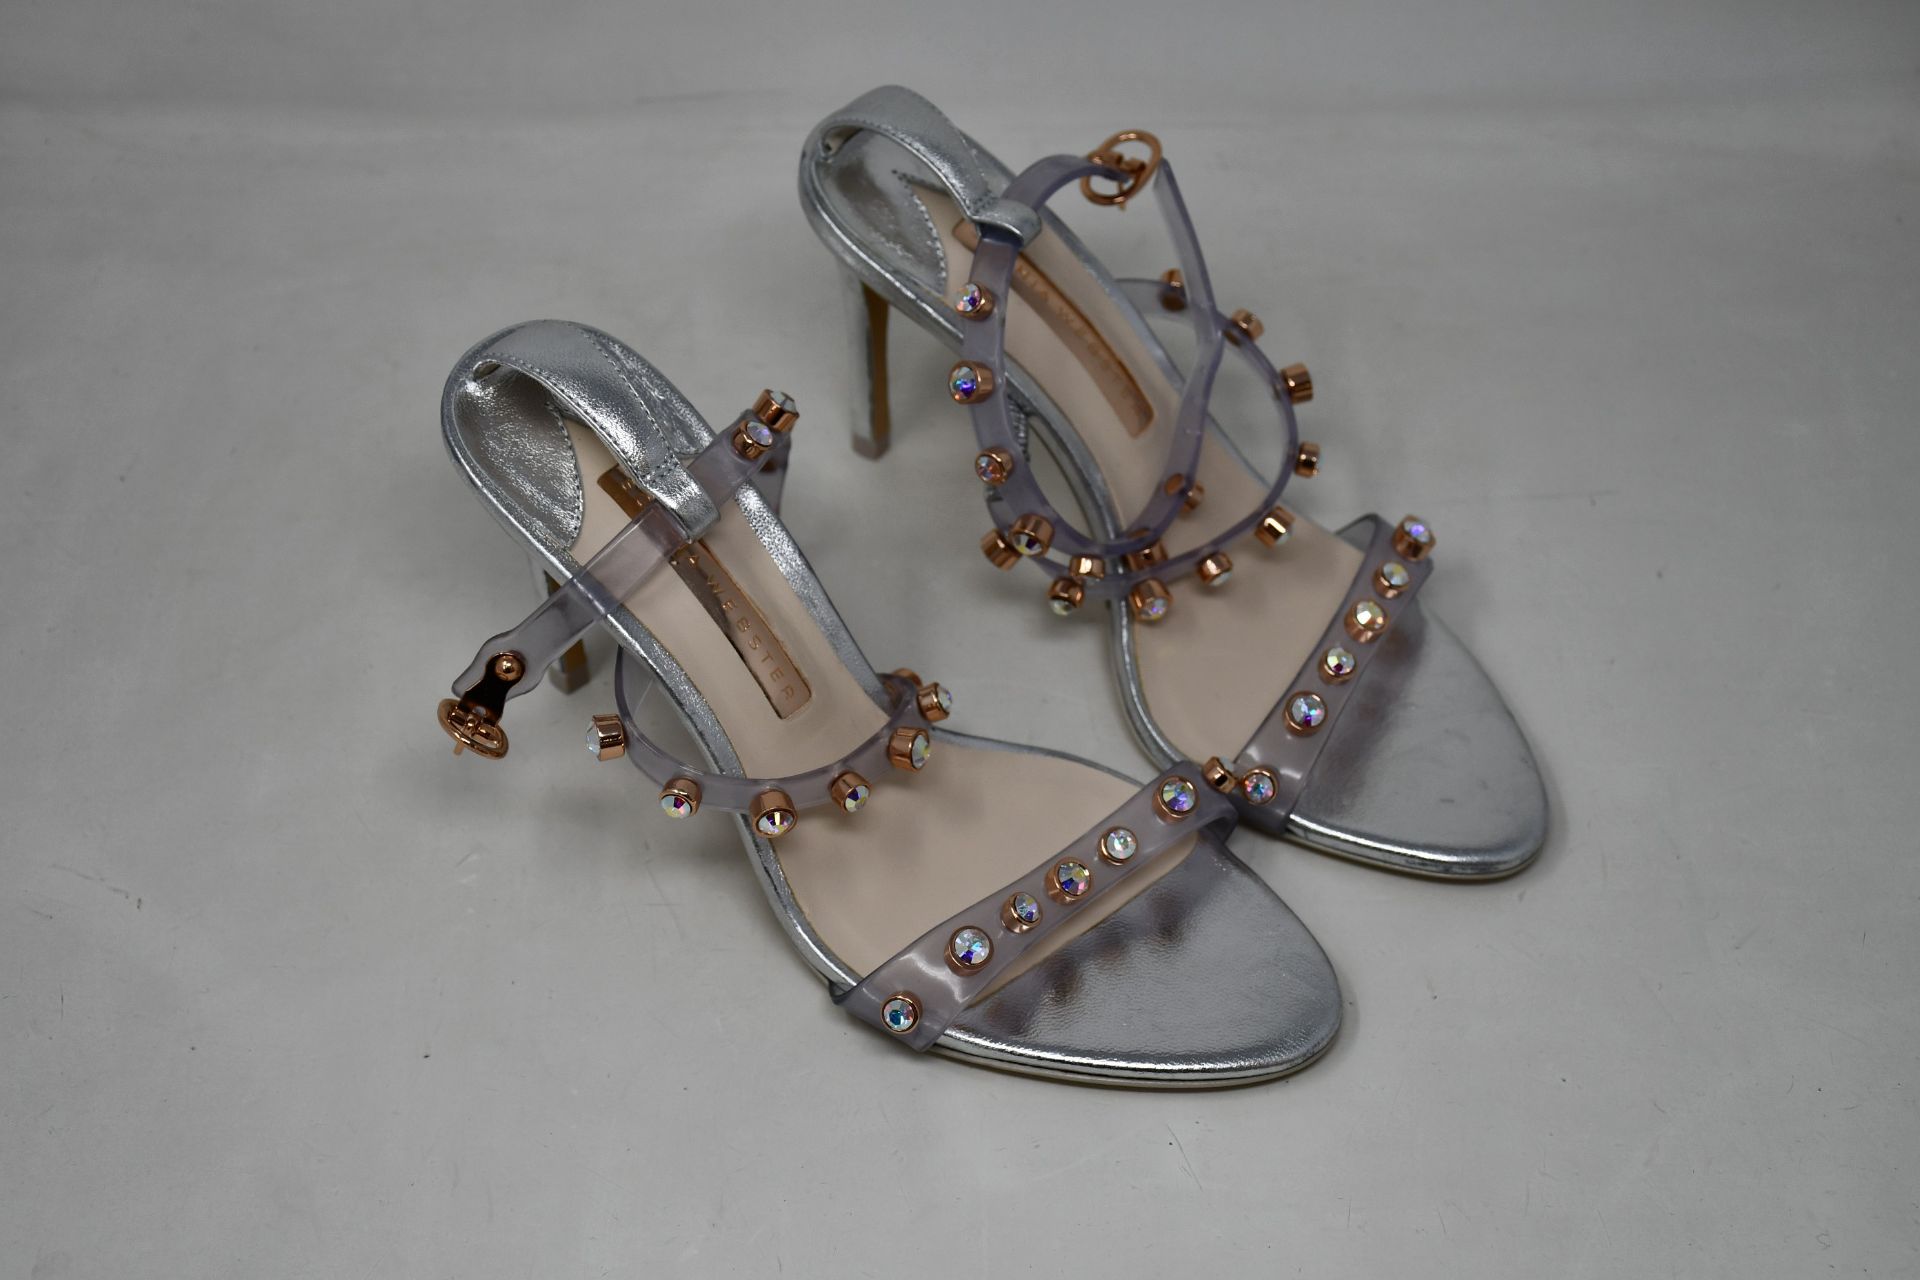 A pair of Sophie Webster silver gem studded shoes (EU 37, Possibly ex-display - No box).